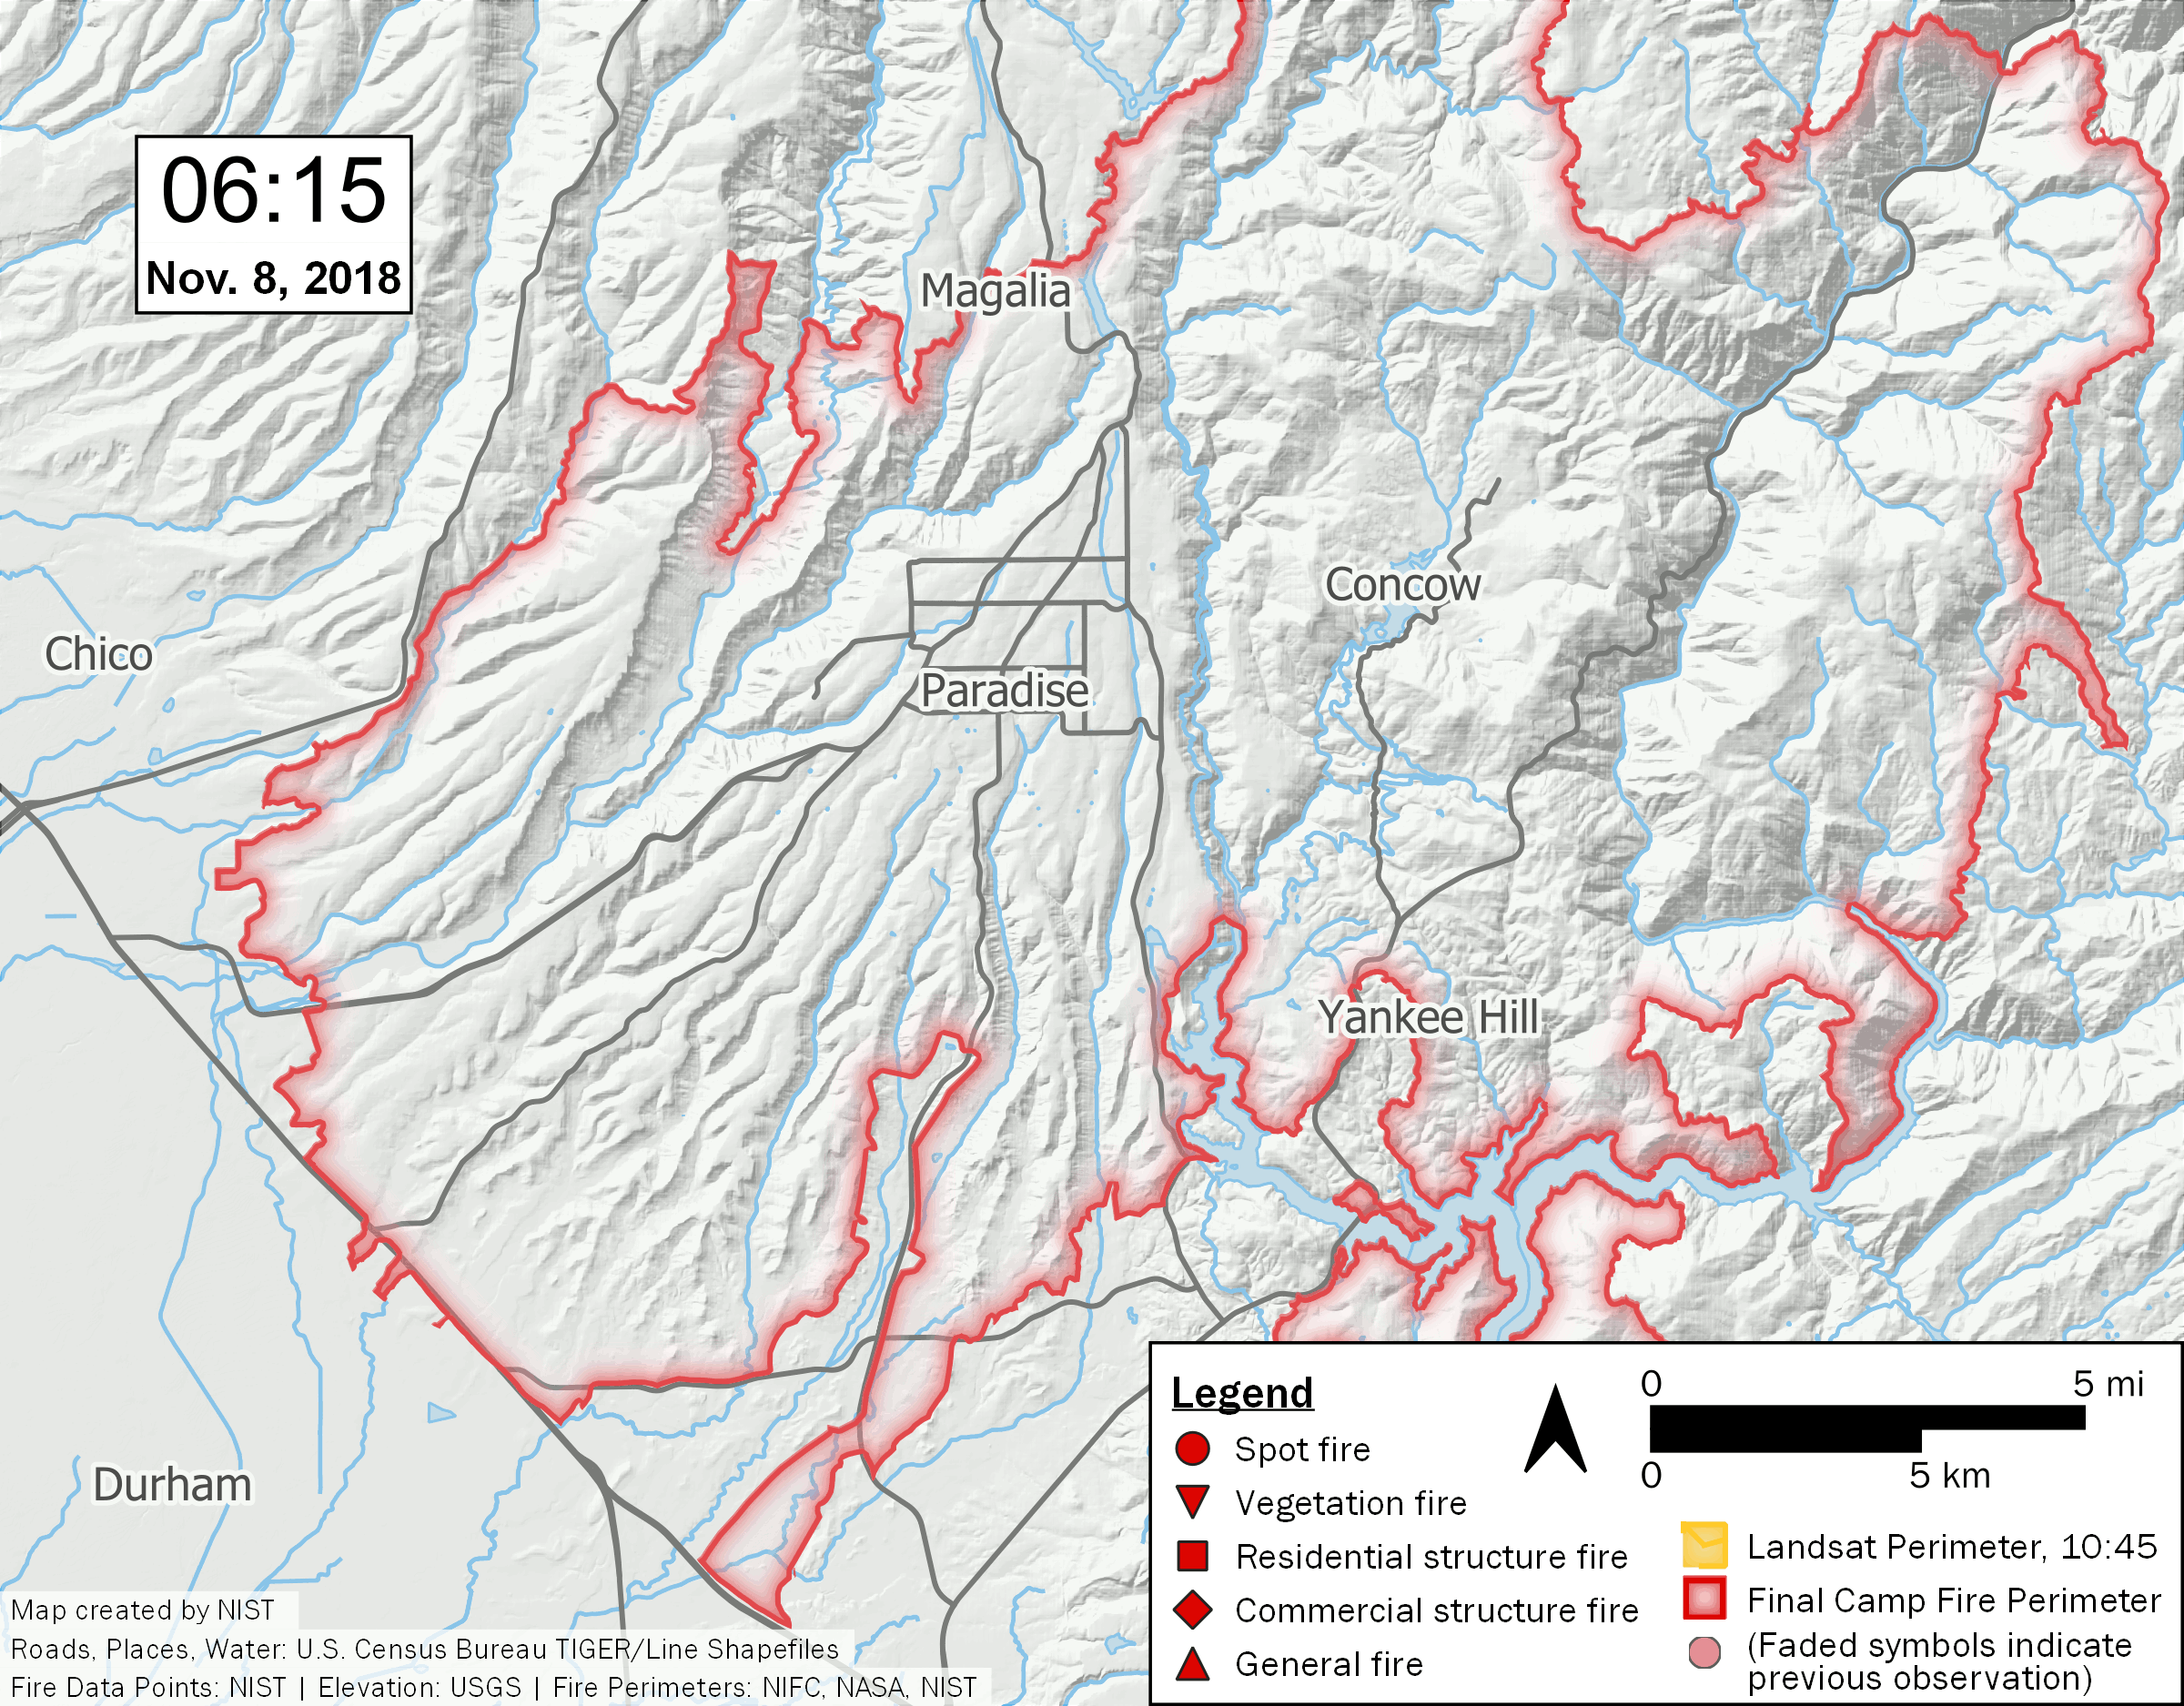 A map of the Camp Fire progression